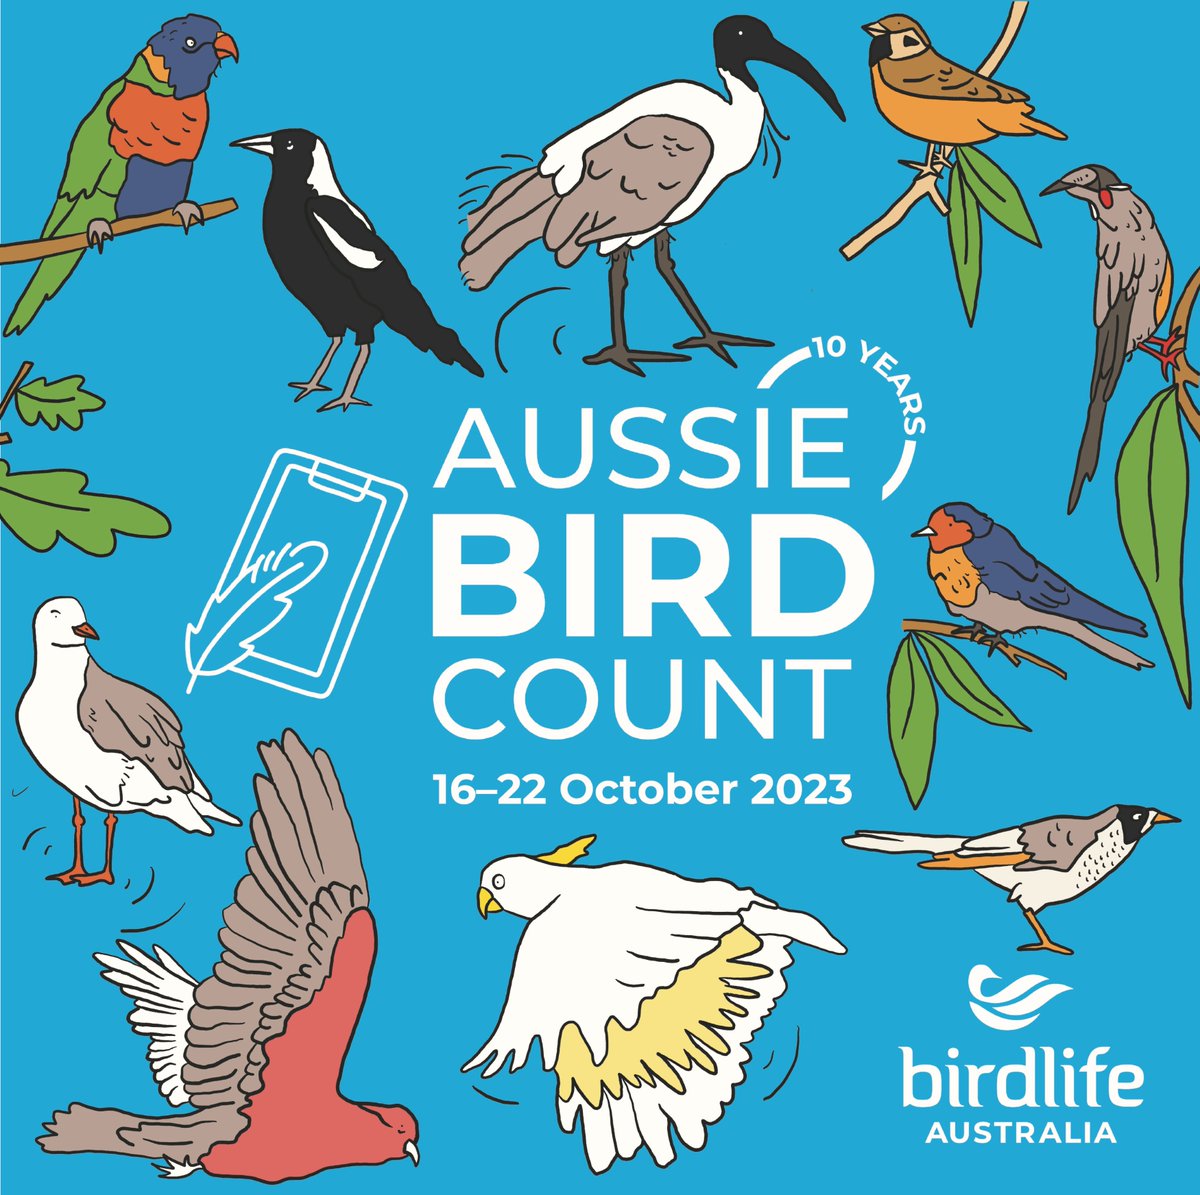 Save the date – the #AussieBirdCount is coming up and we can’t wait! The 2023 event will run from October 16‒22, and registrations are now open. Register today at aussiebirdcount.org.au and help us make the tenth Aussie Bird Count our biggest and best one yet!